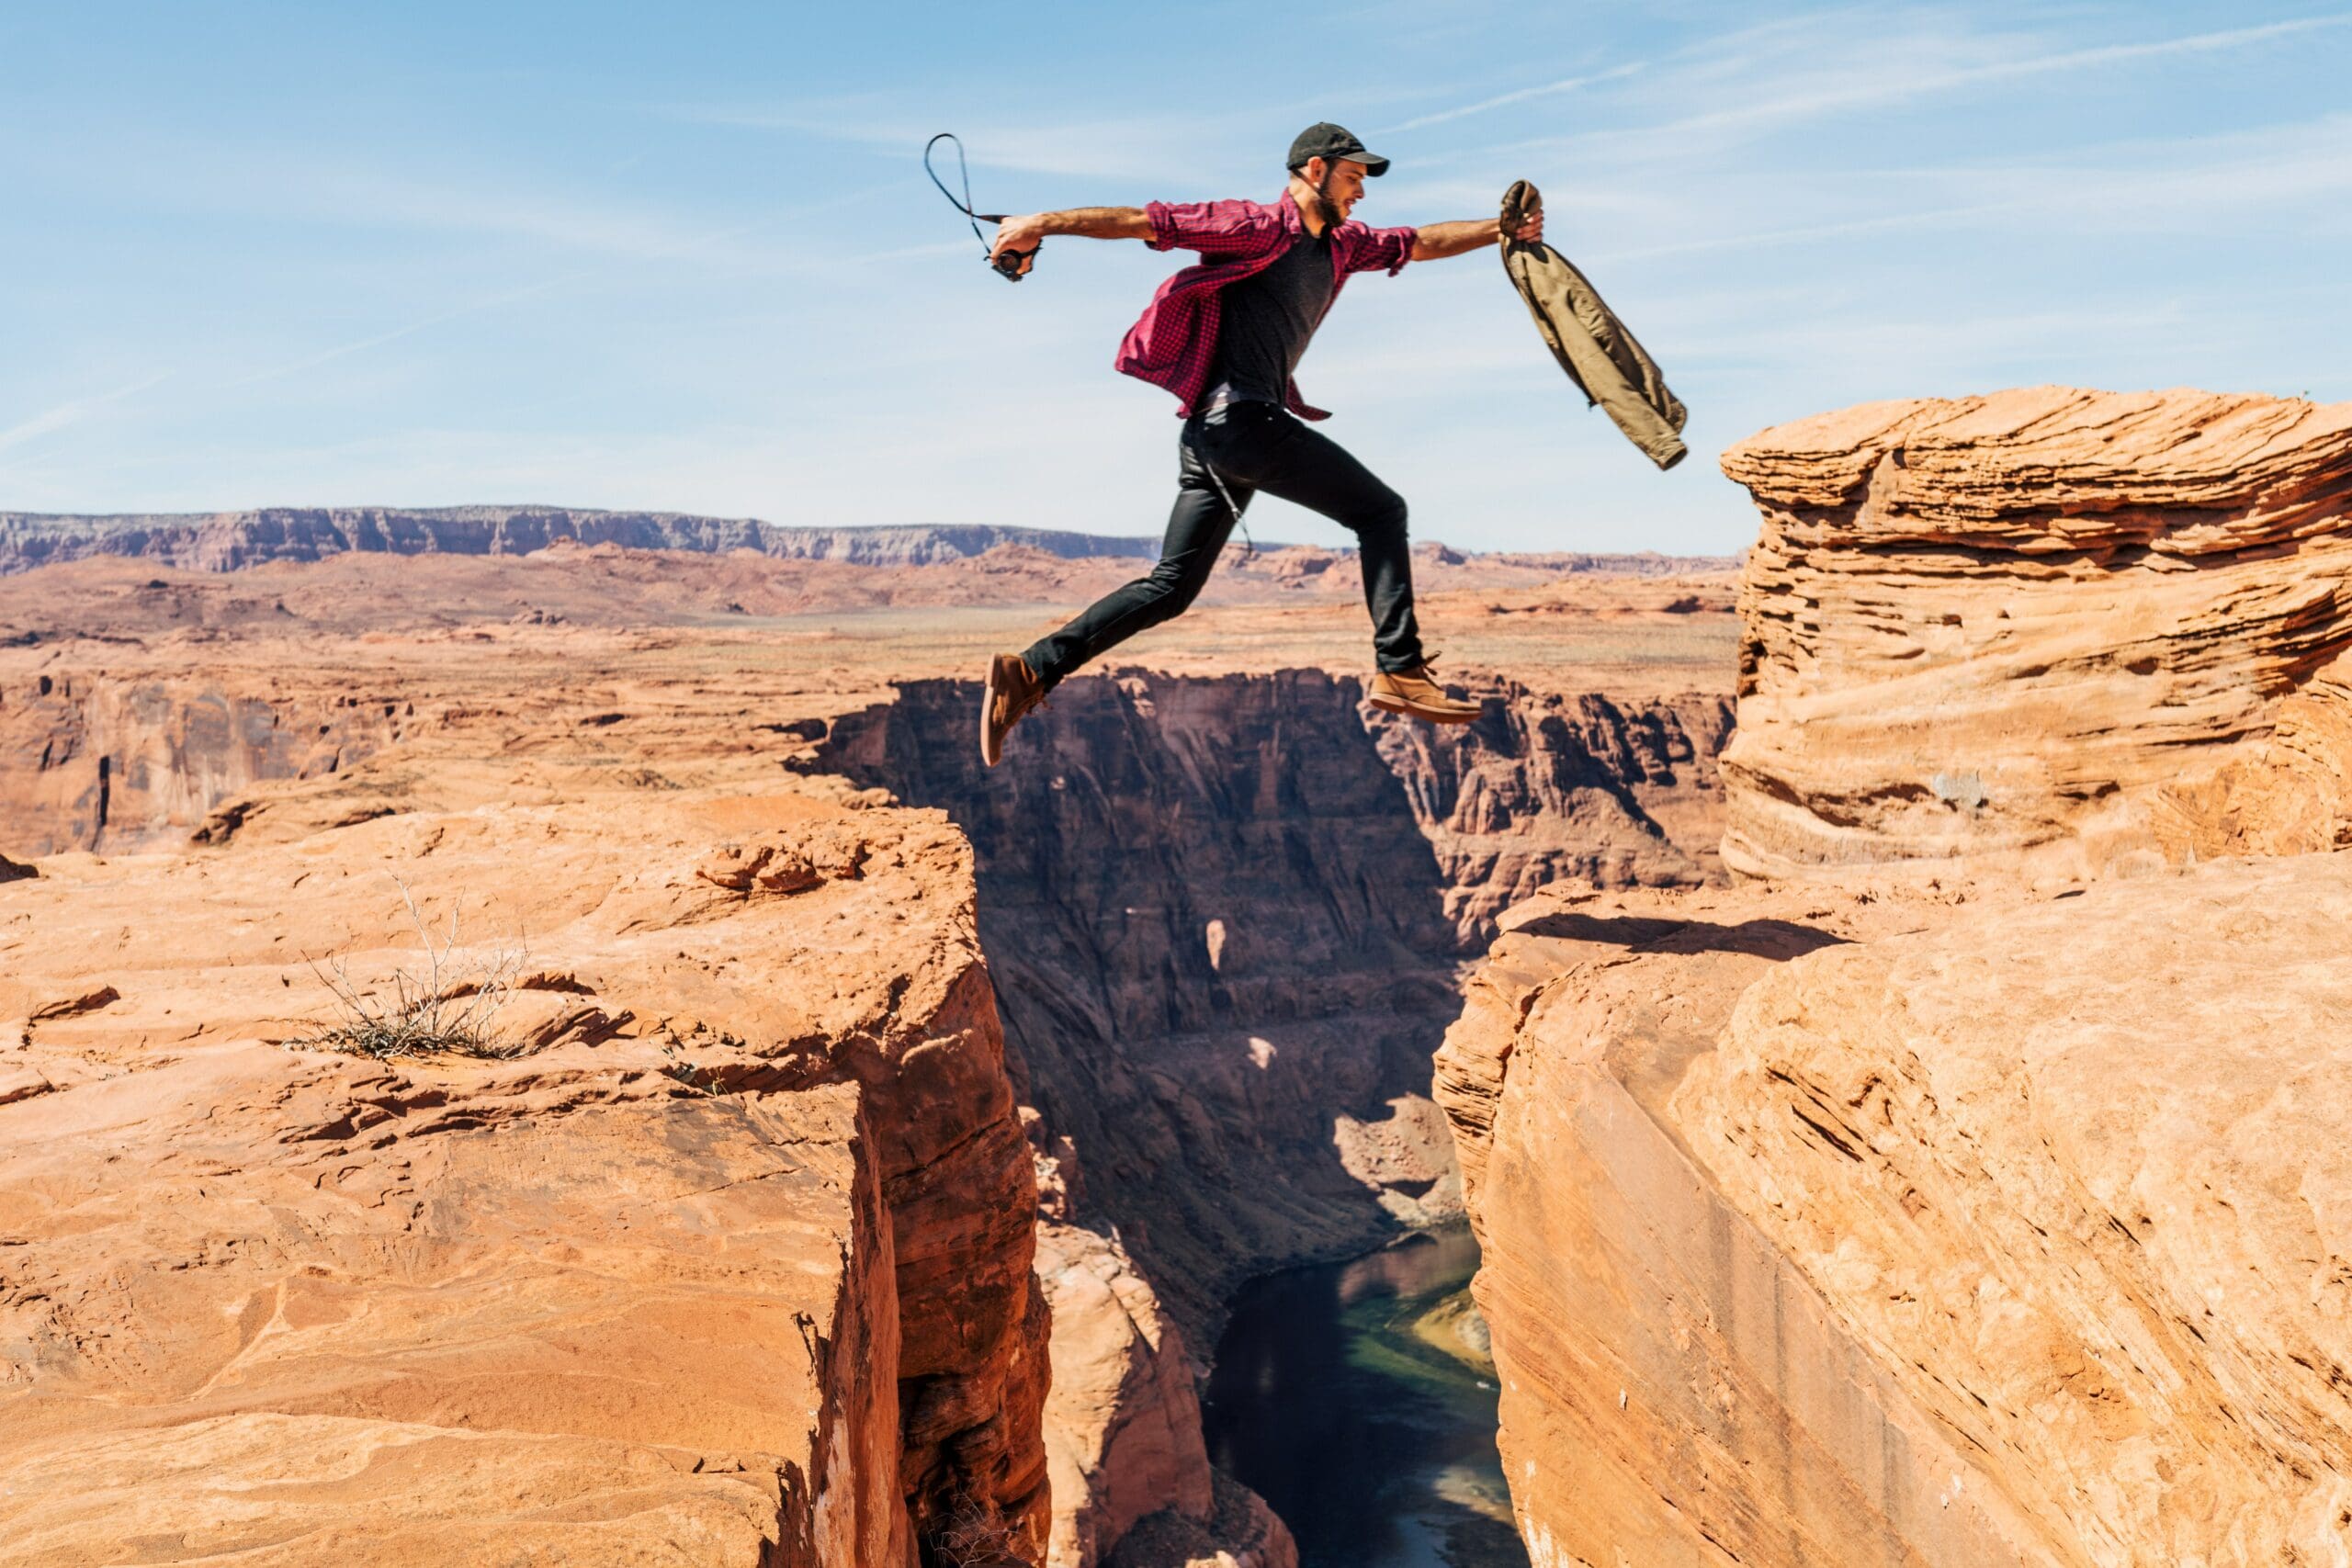 A man jumping across a canyon suspended mid-air. He's carrying a camera in one hand and a jacket in the other. The depth of the canyon is clear below and a river is running through it.